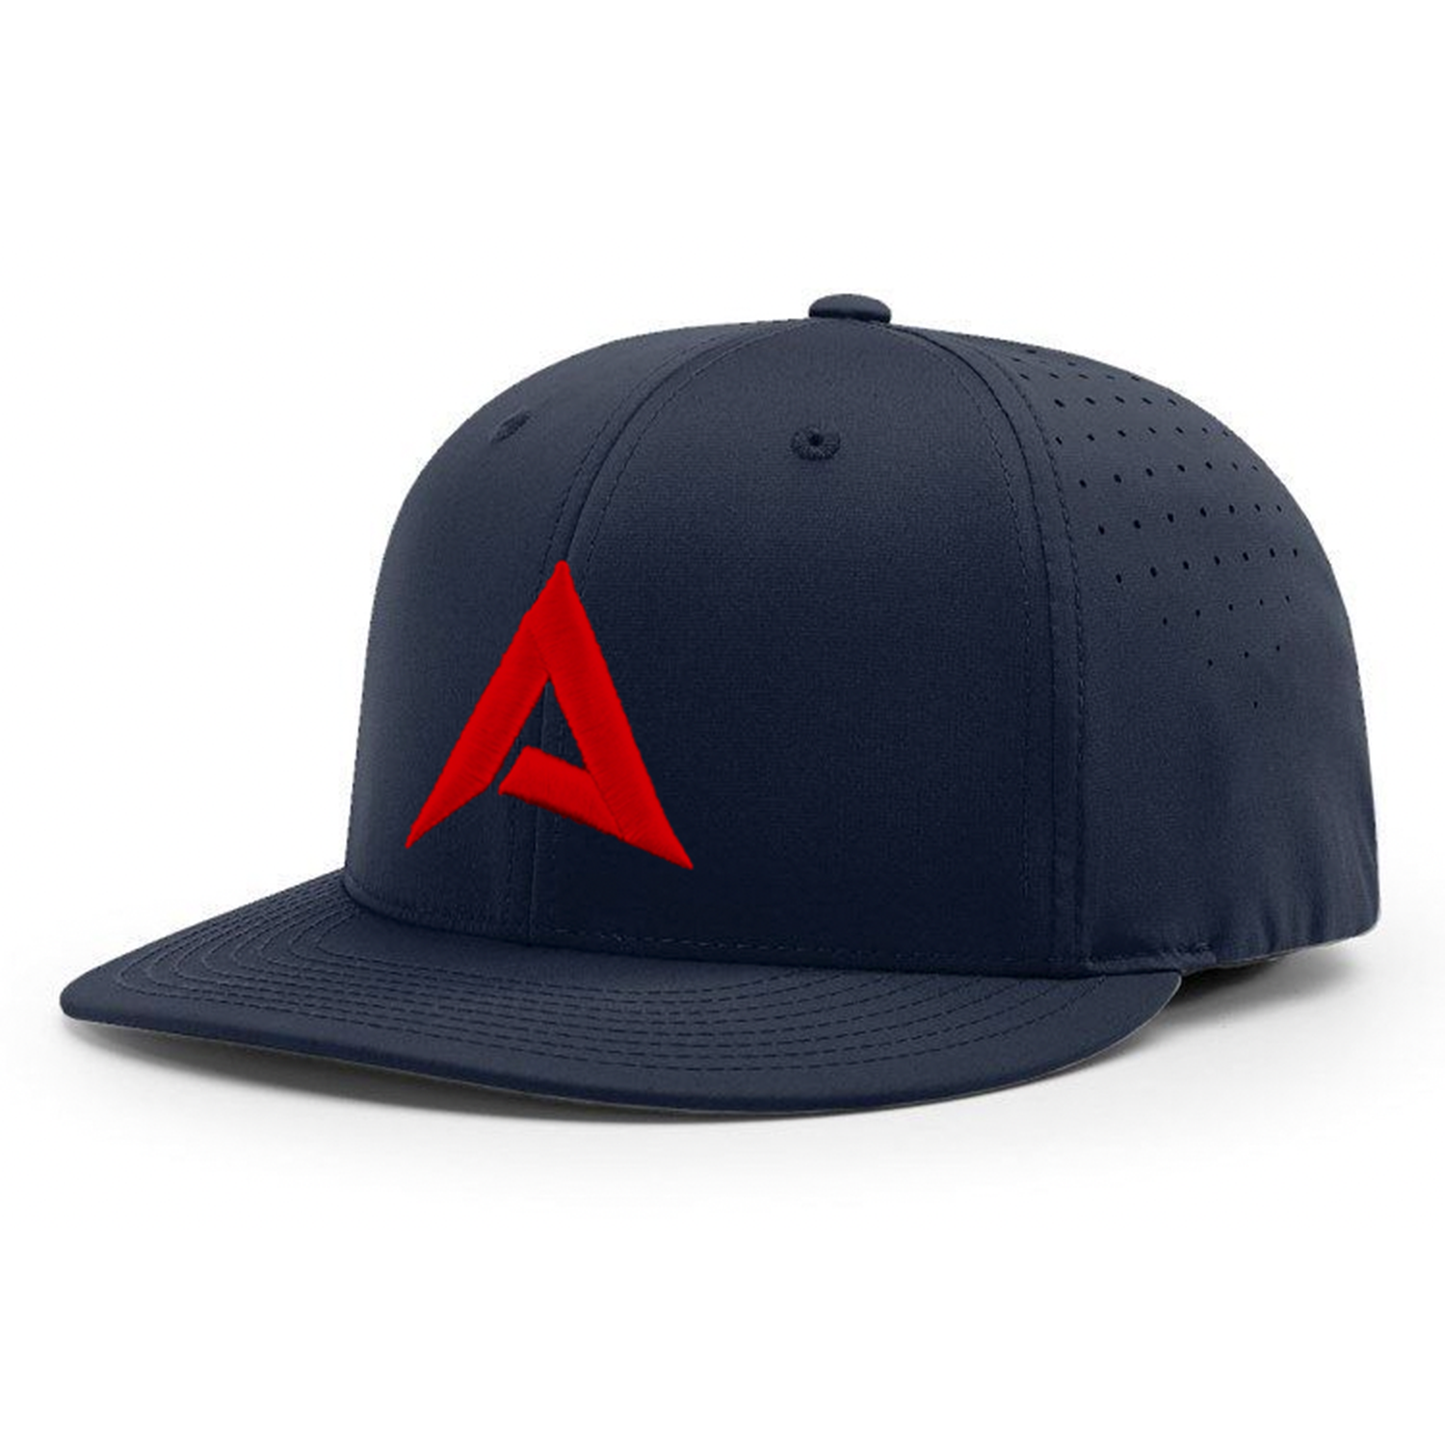 Anarchy CA i8503 Performance Hat - New Logo - Navy/Red